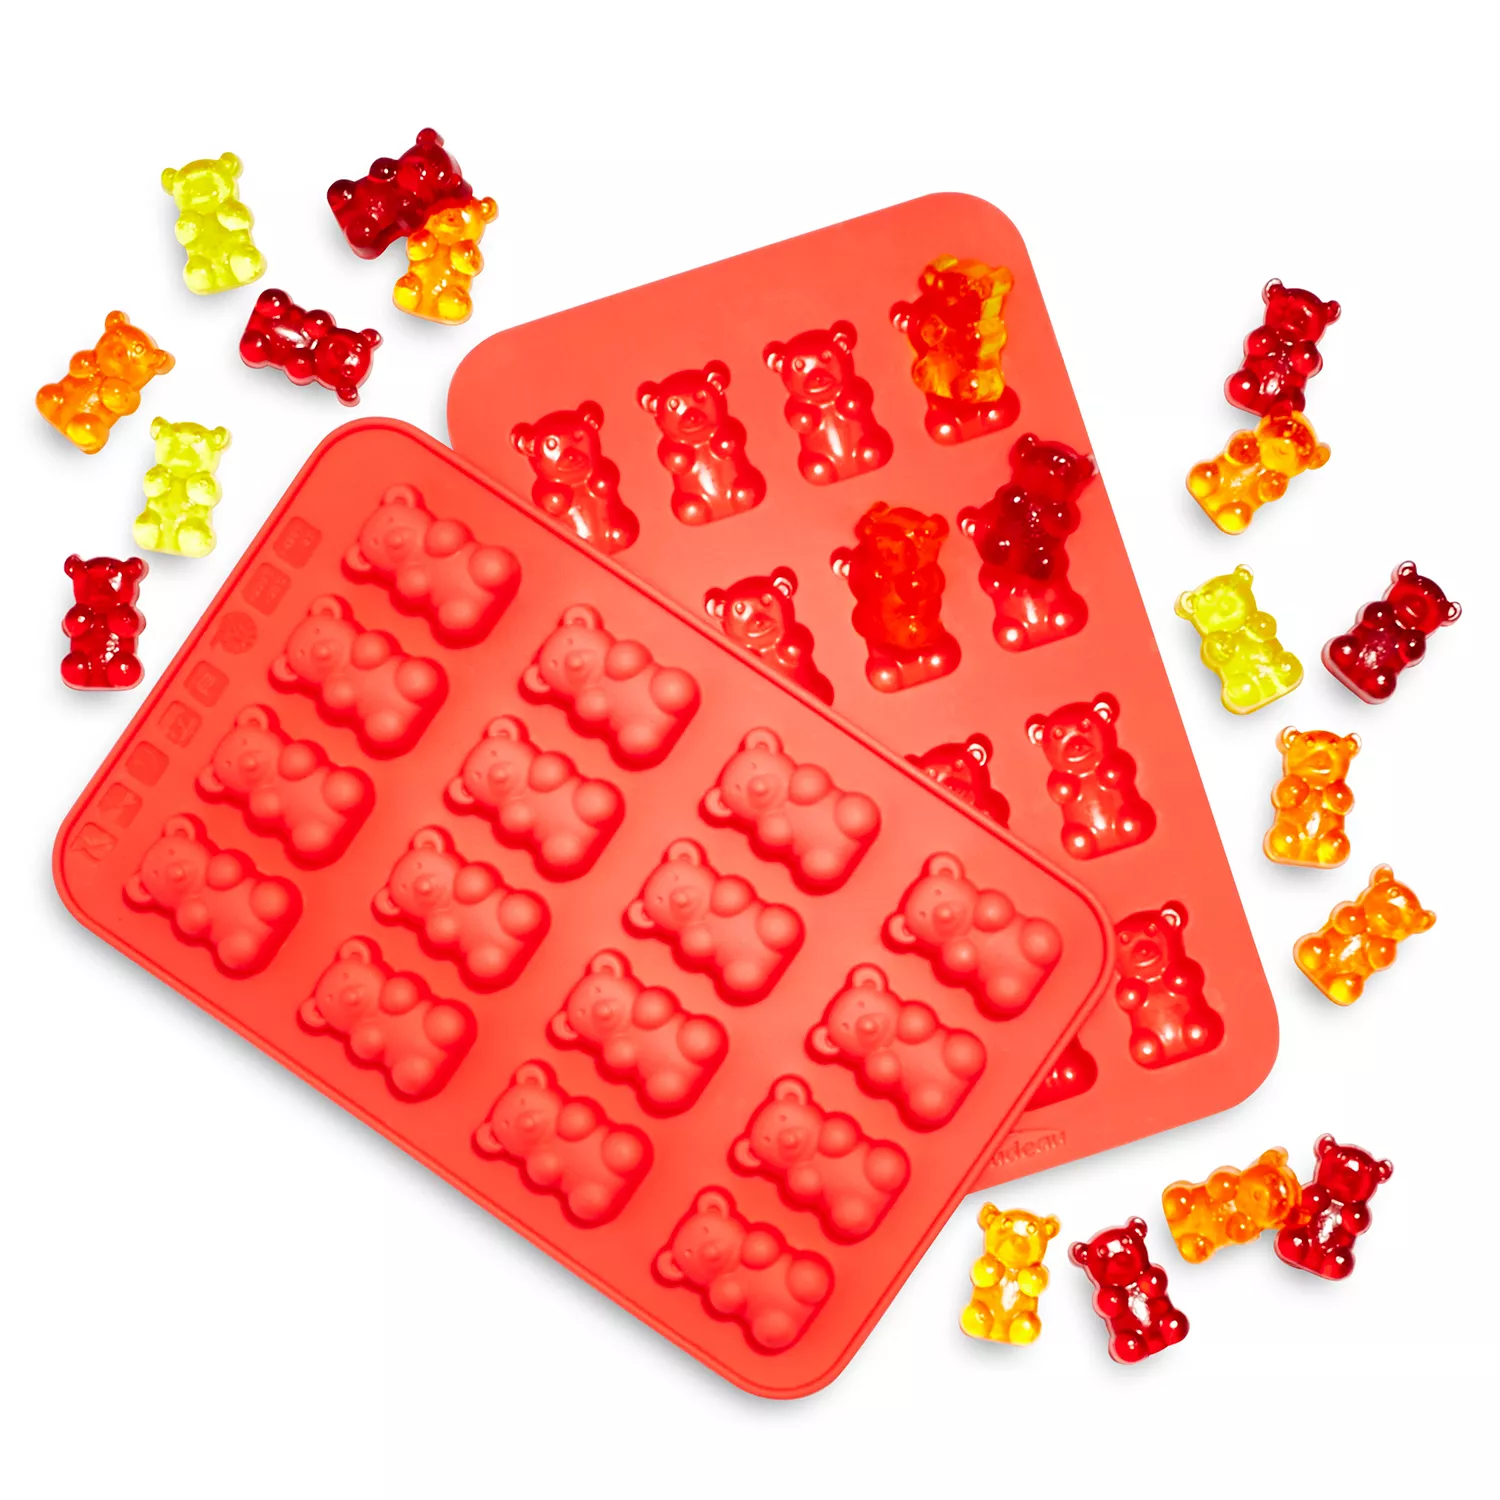 Silicone Gummy Bear Candy Silicone Molds & Ice Cube Tablets - Set